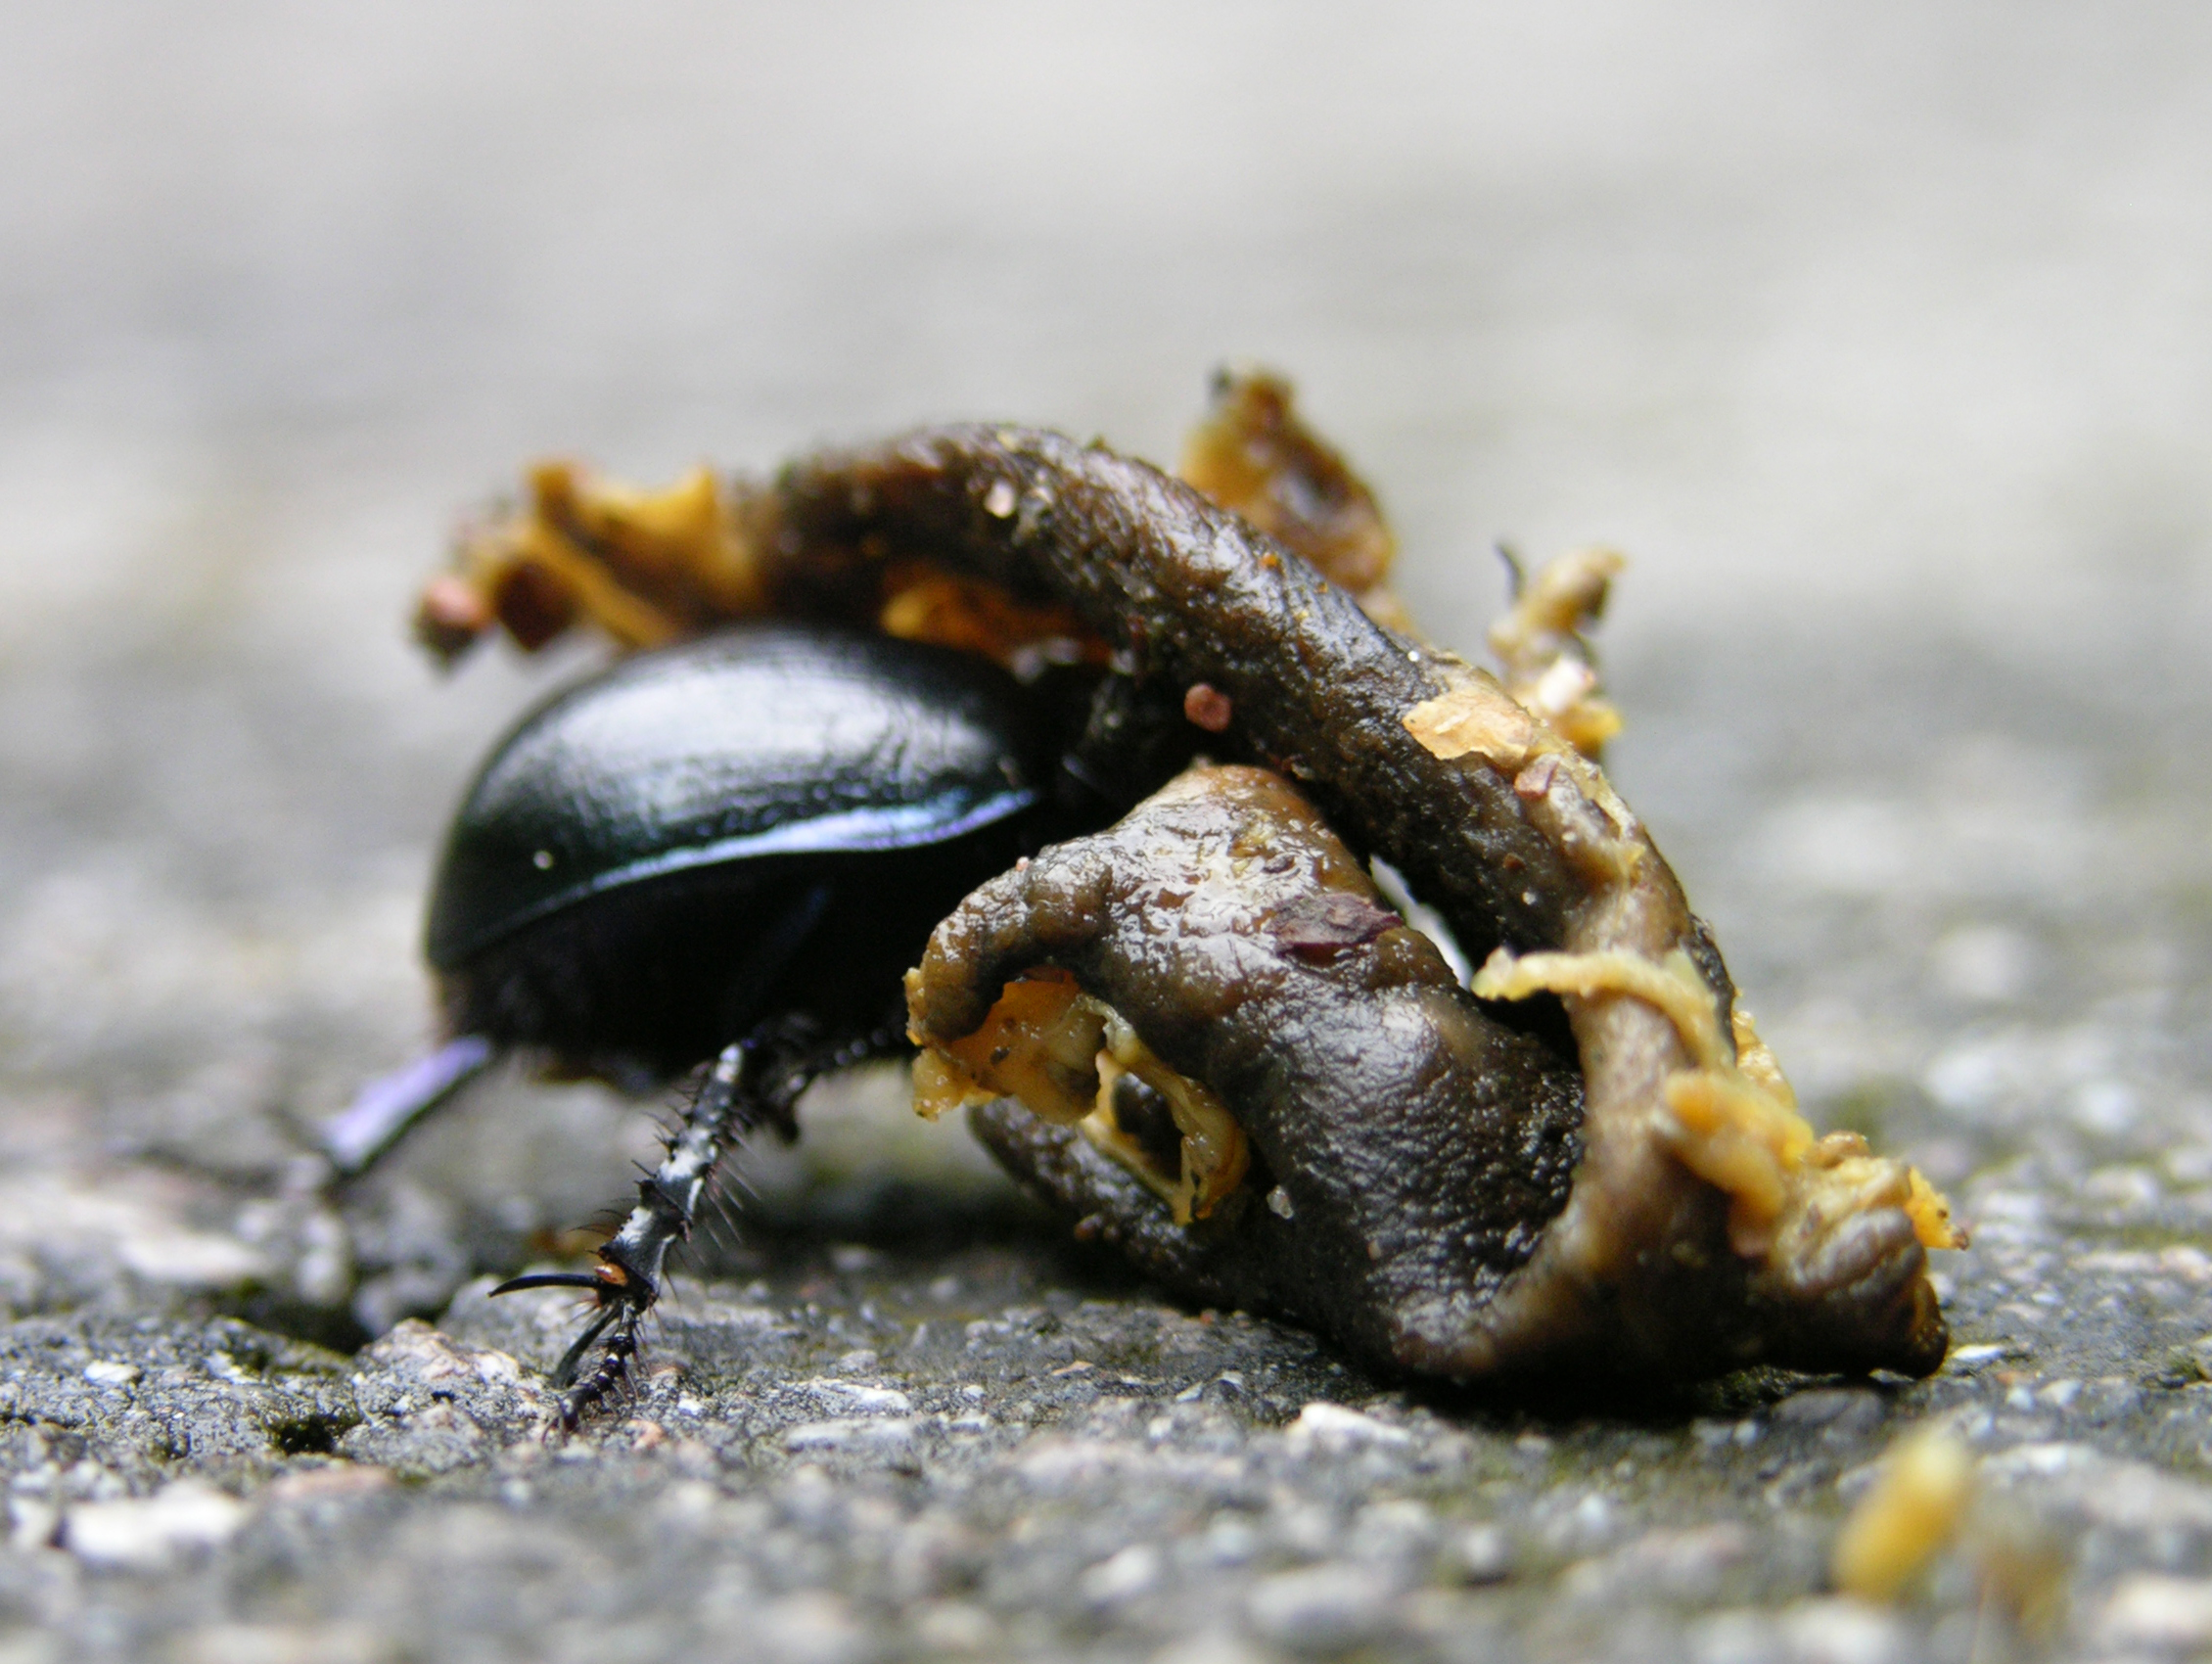 File:Bug moving dead snail with fly 3.jpg - Wikimedia Commons